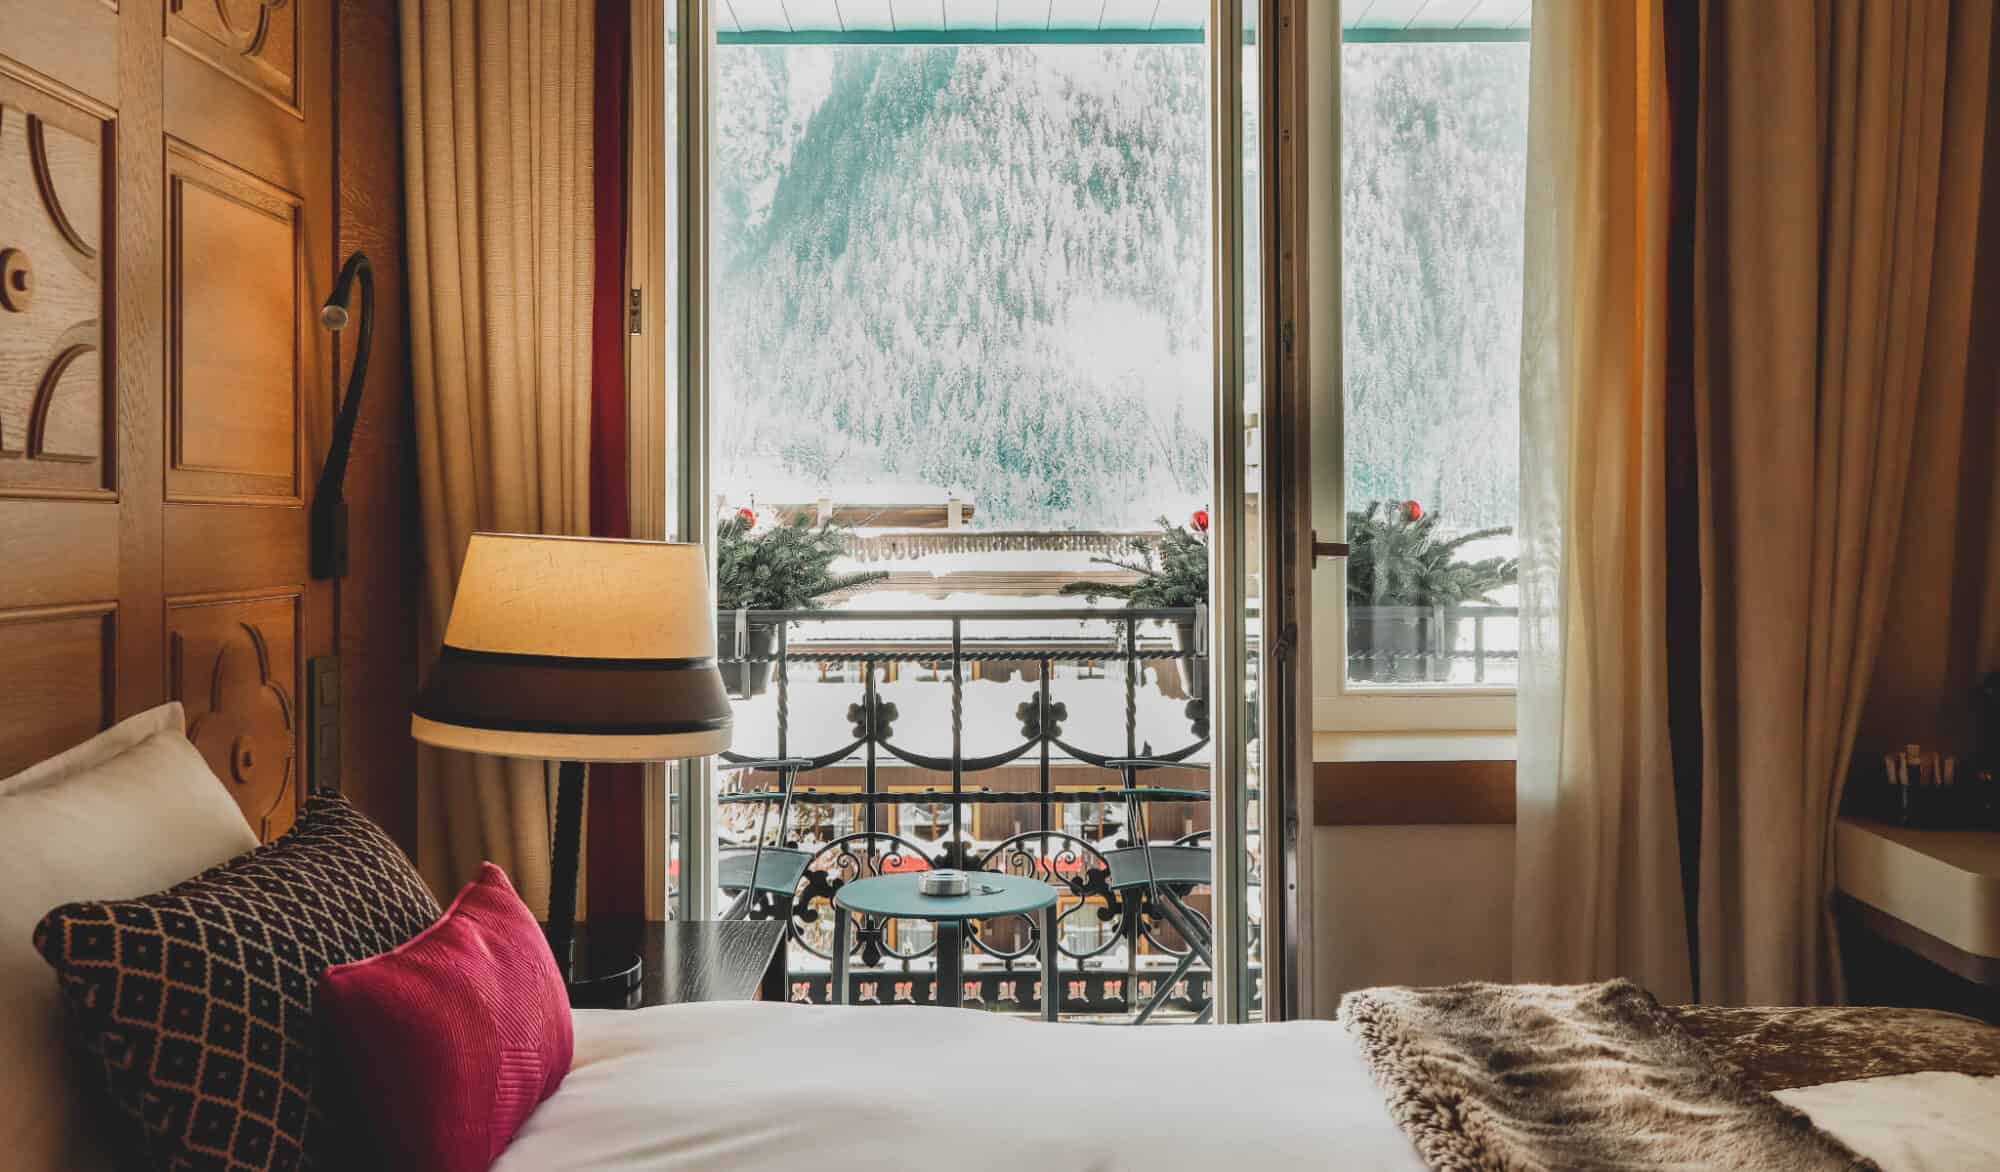 A hotel room at Hotel-Mont Blanc, Chamonix with a bed against a wood paneled wall, white bedding, beige, burgundy and red pillows, and a view of a snowy mountain slope.